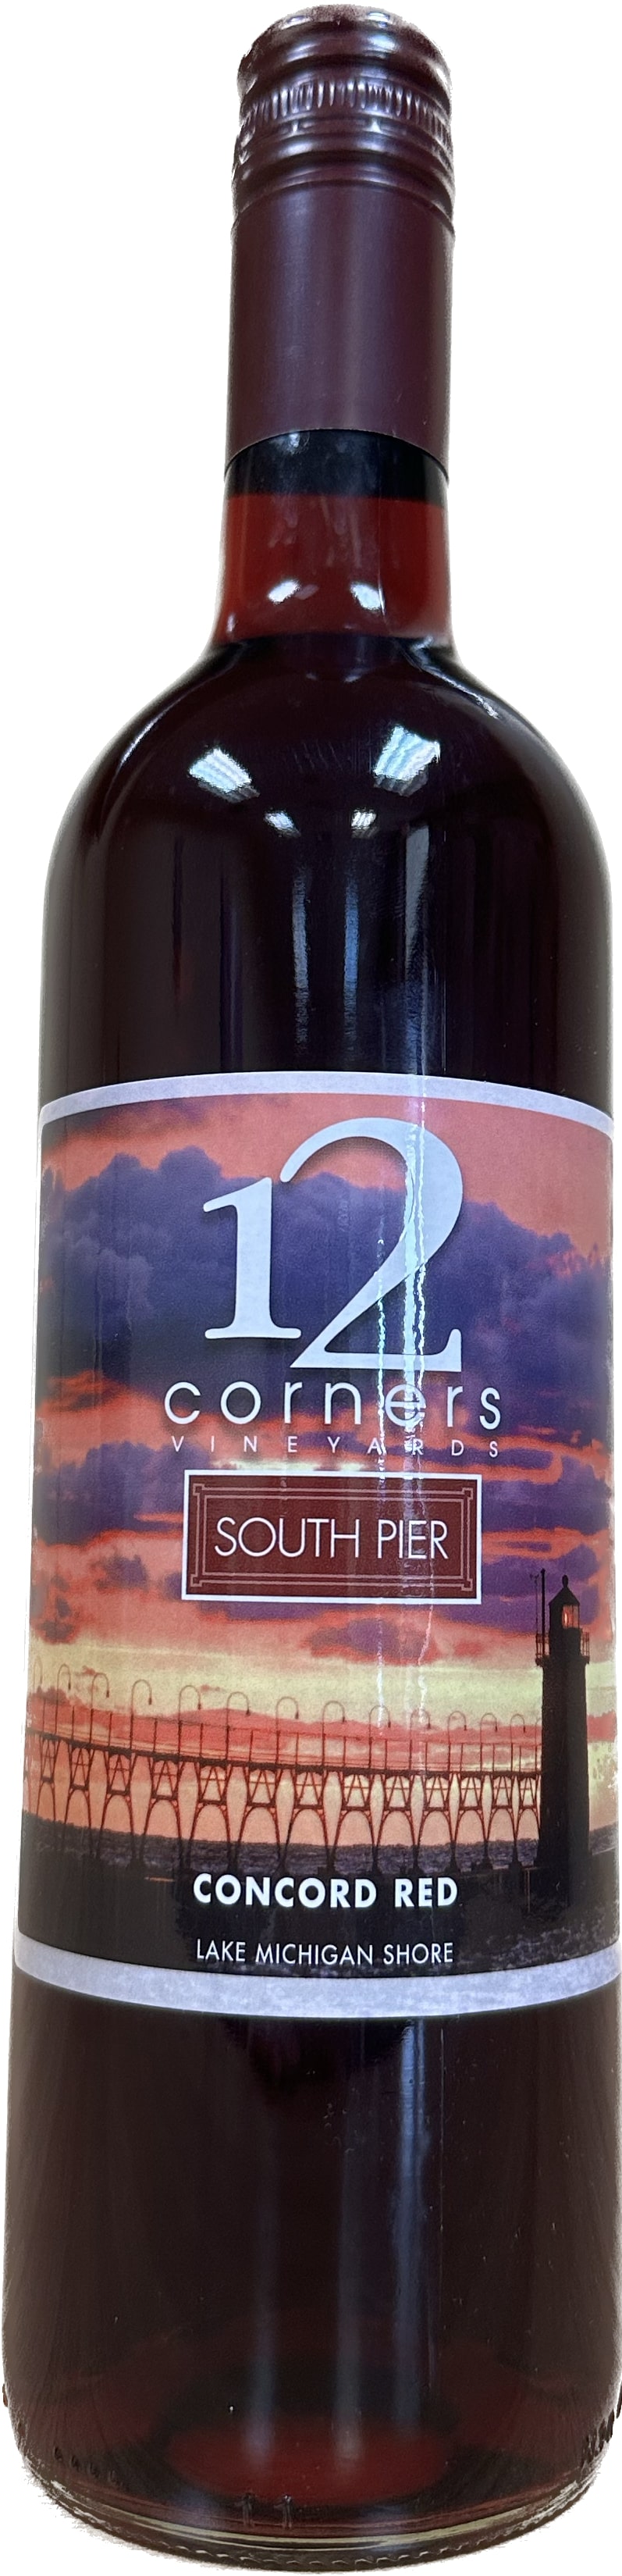 Product Image for South Pier Red